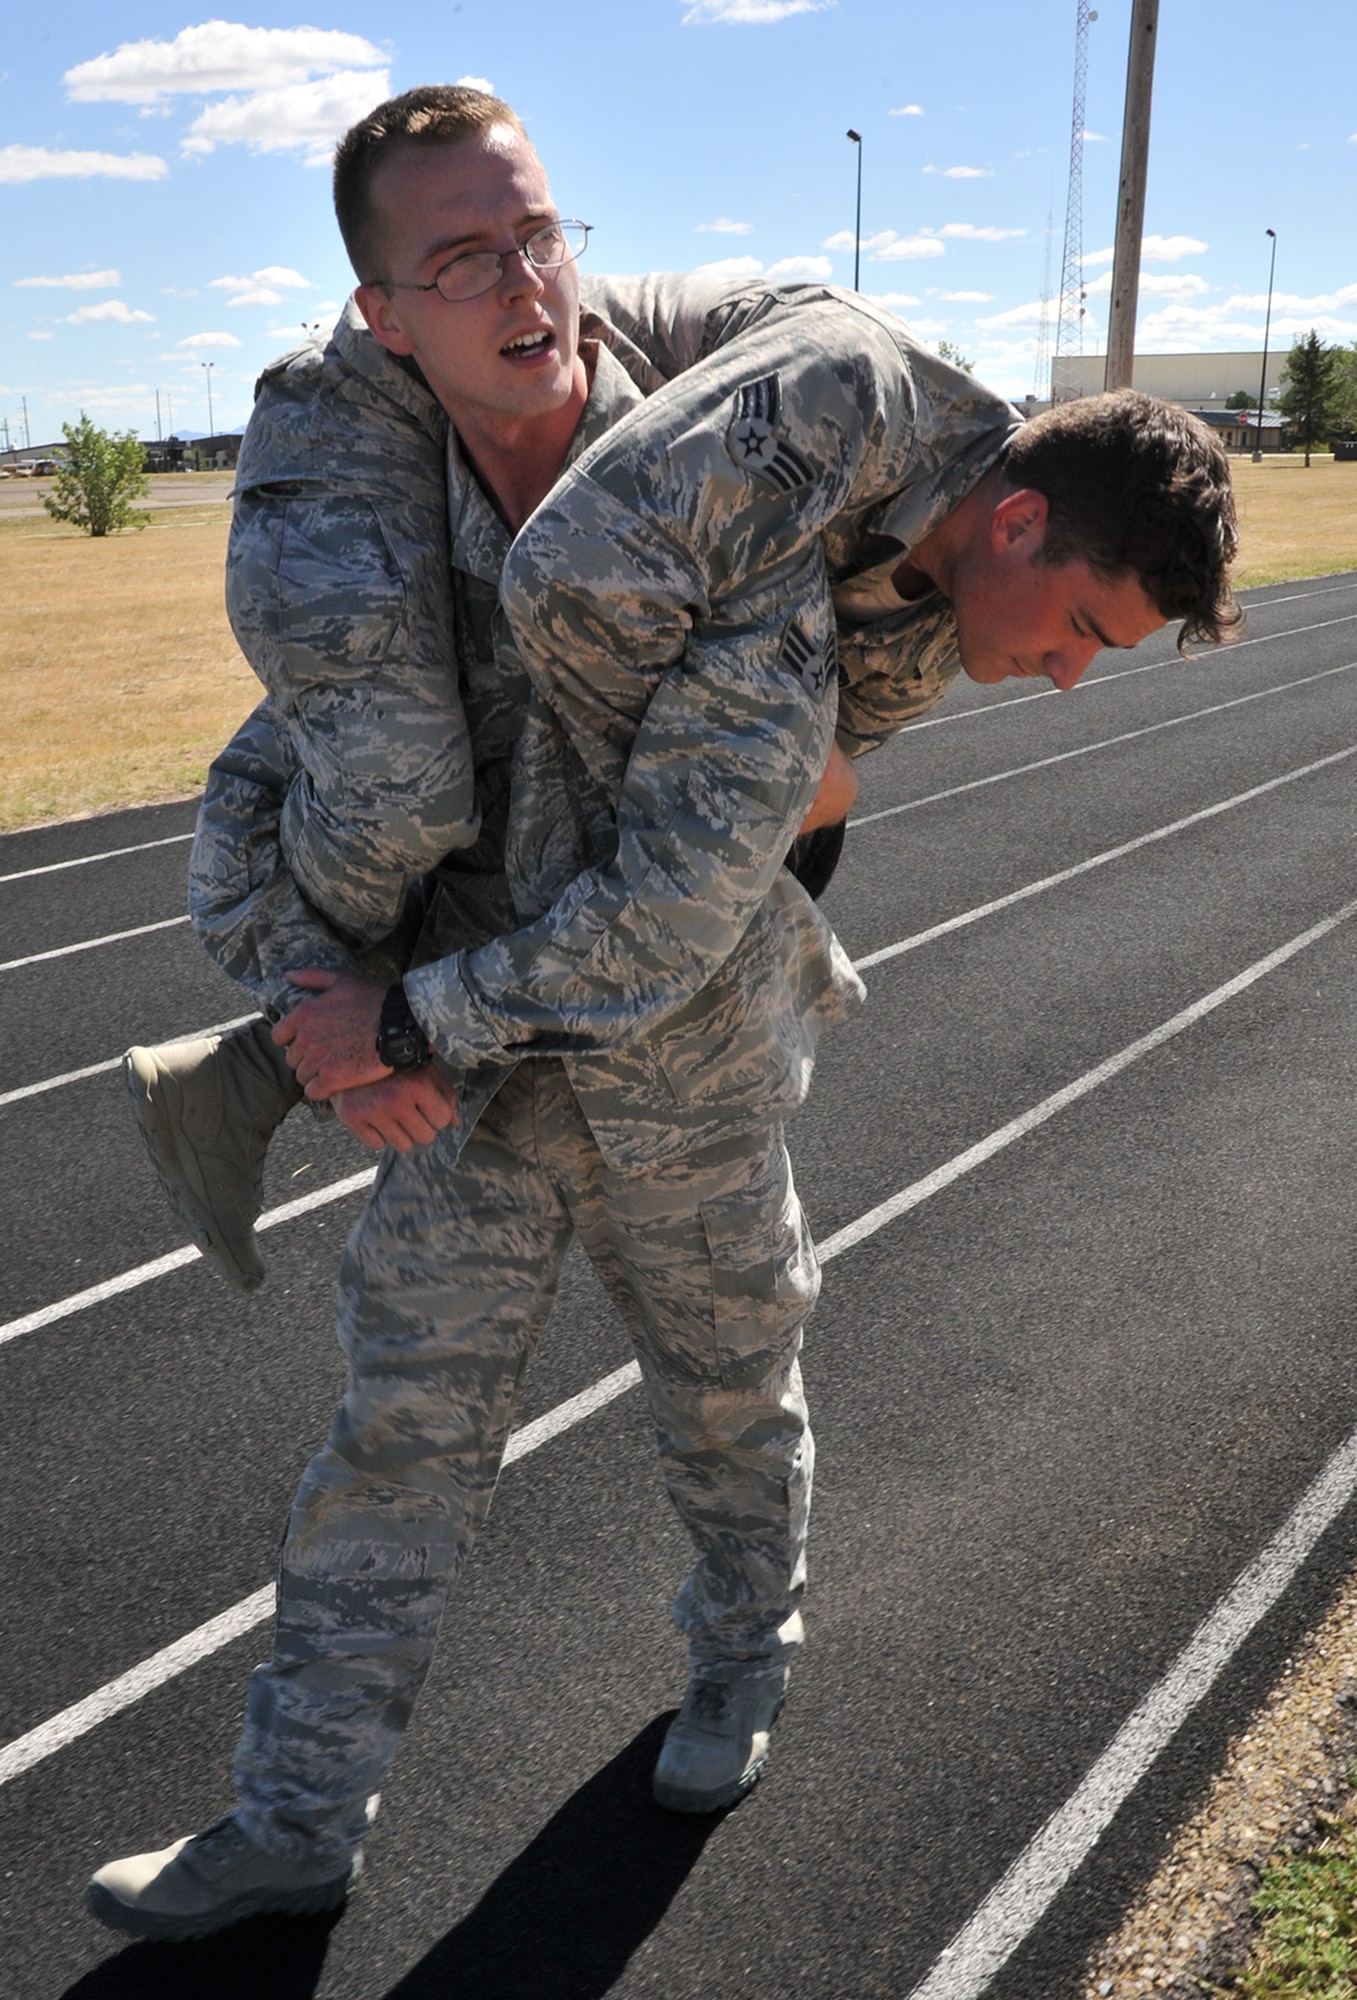 Senior Airman Zachary Conn, 341st Missile Security Forces Squadron, buddy carries Senior Airman Daniel Orcutt, 741st Missile Security Forces Squadron, July 29 during tryouts for Malmstrom’s Global Strike Challenge 2015 security forces team. A total of 16 candidates tried out for 12 positions on the team; the final team will be narrowed to six members after six weeks of training. (U.S. Air Force photo/John Turner)